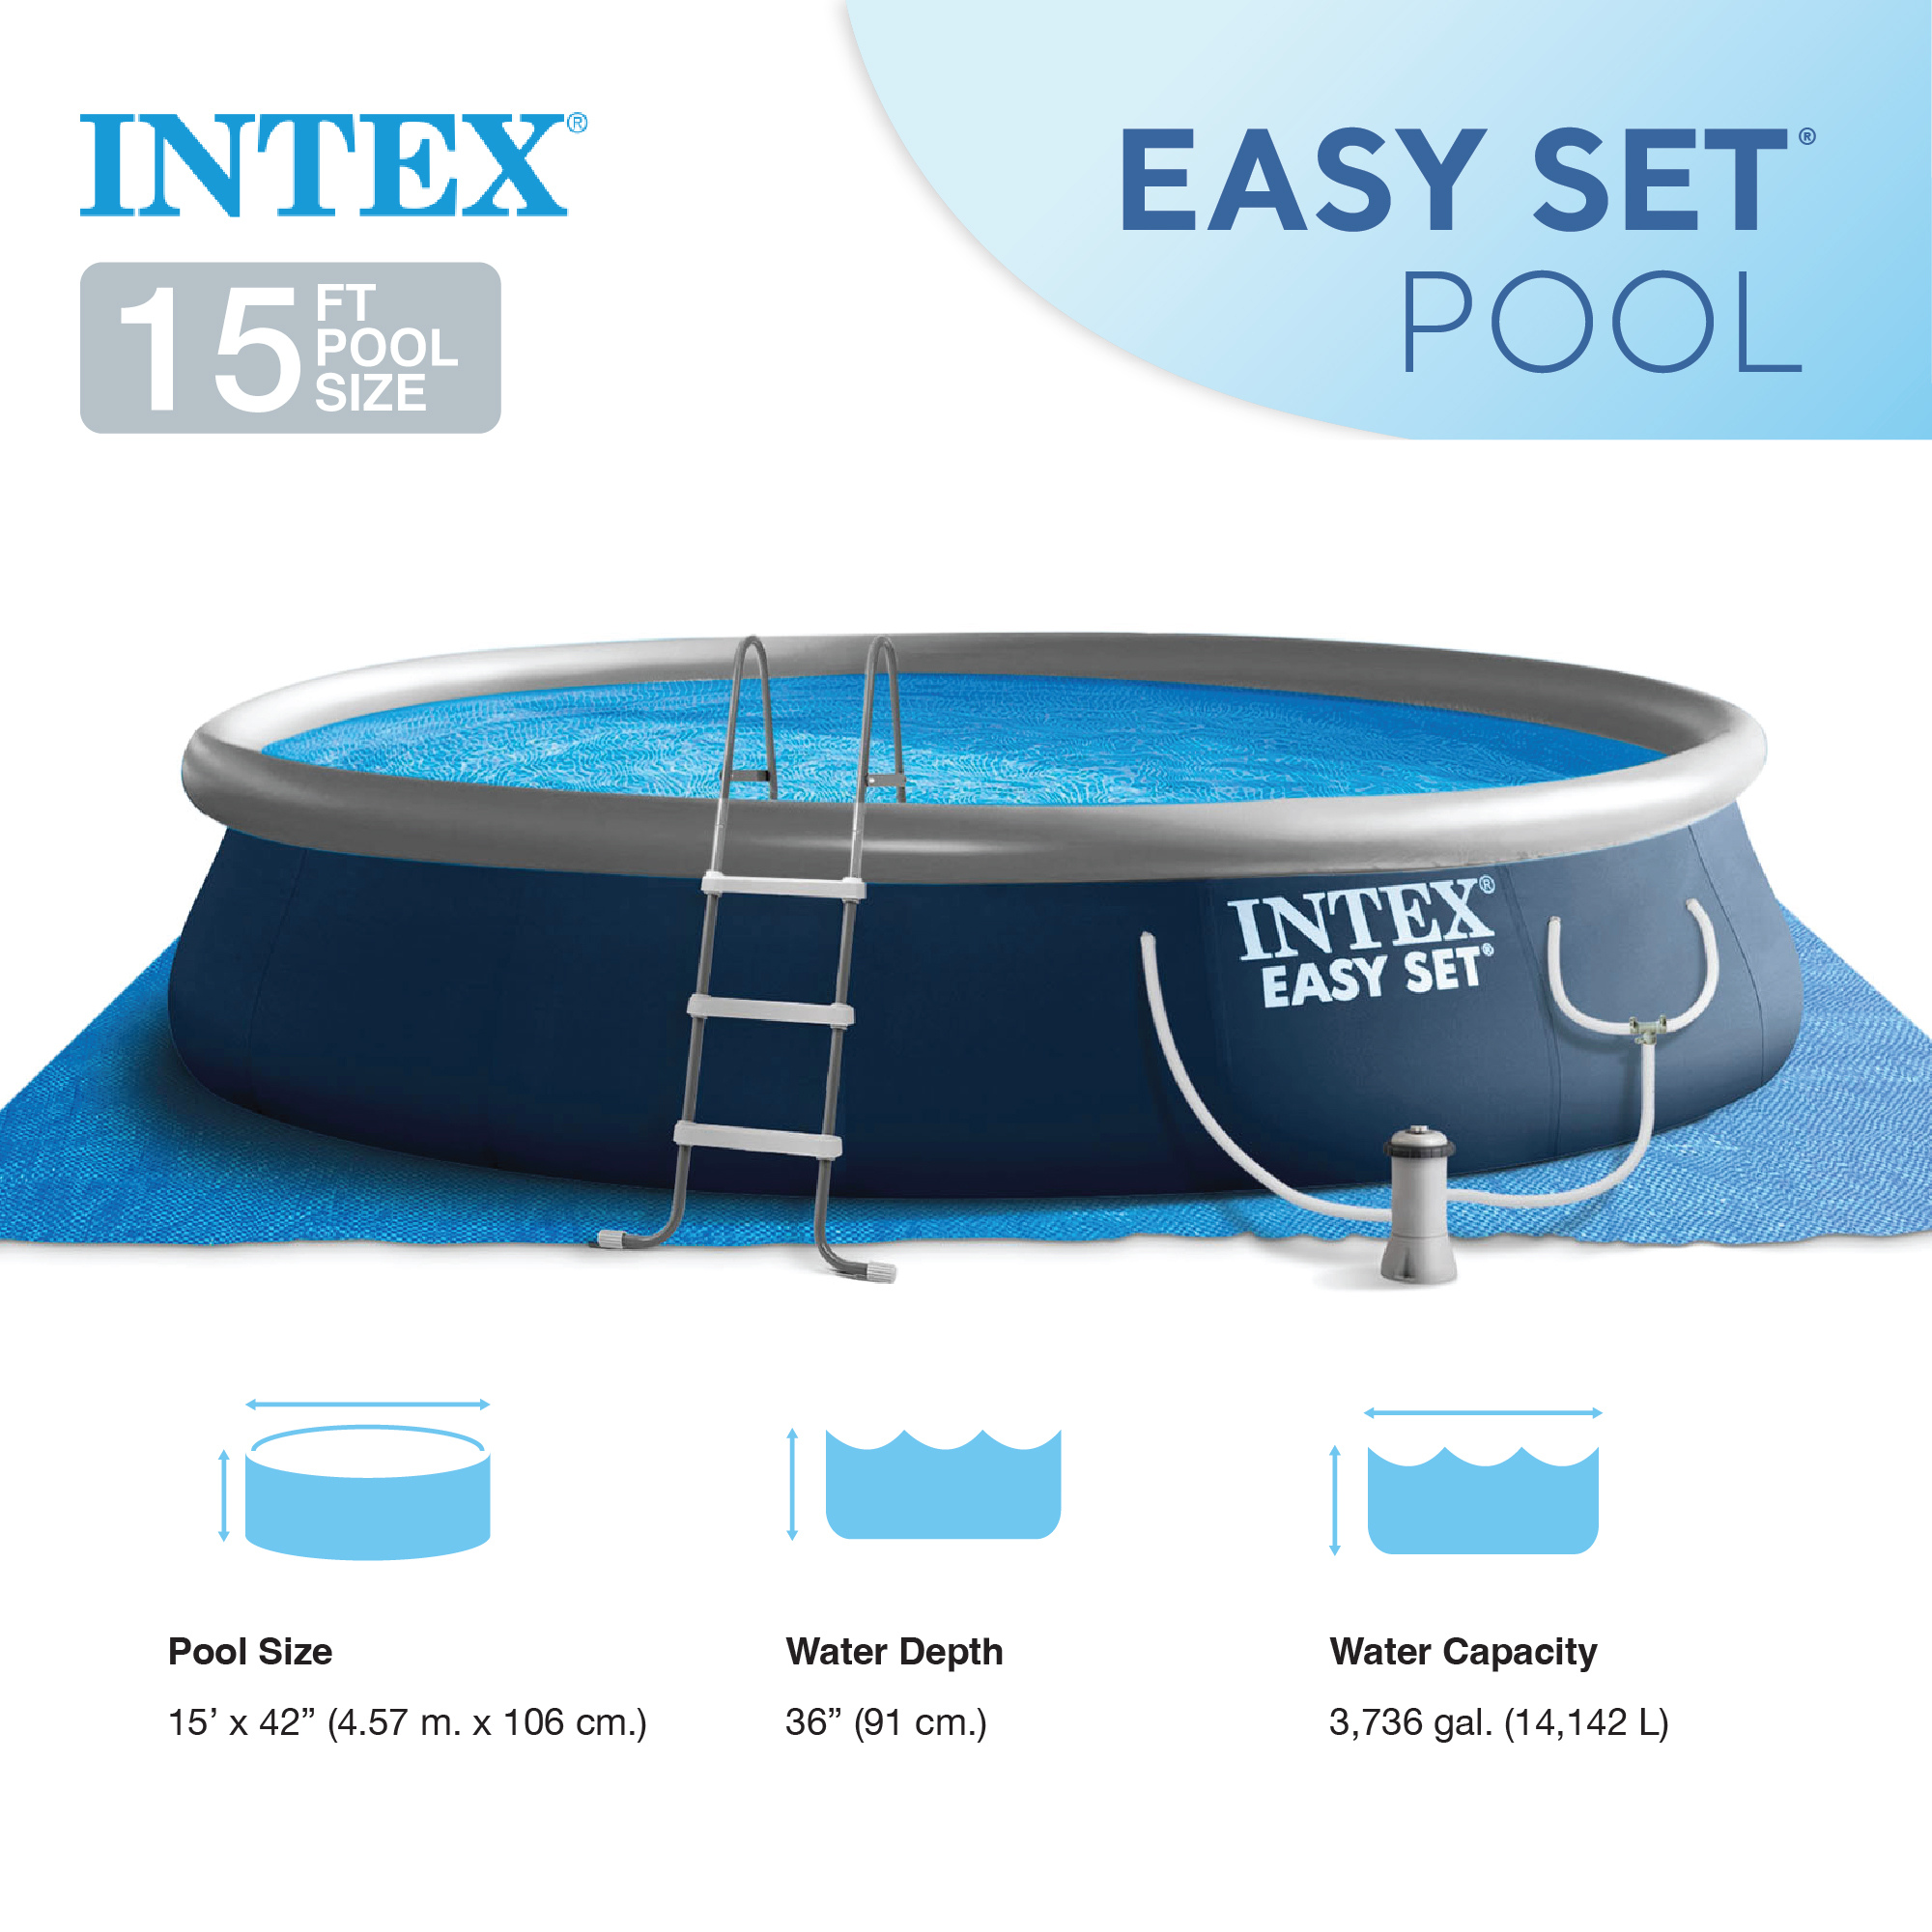 Intex Easy Set 15' x 42" Inflatable Outdoor Above Ground Swimming Pool Set - image 3 of 11